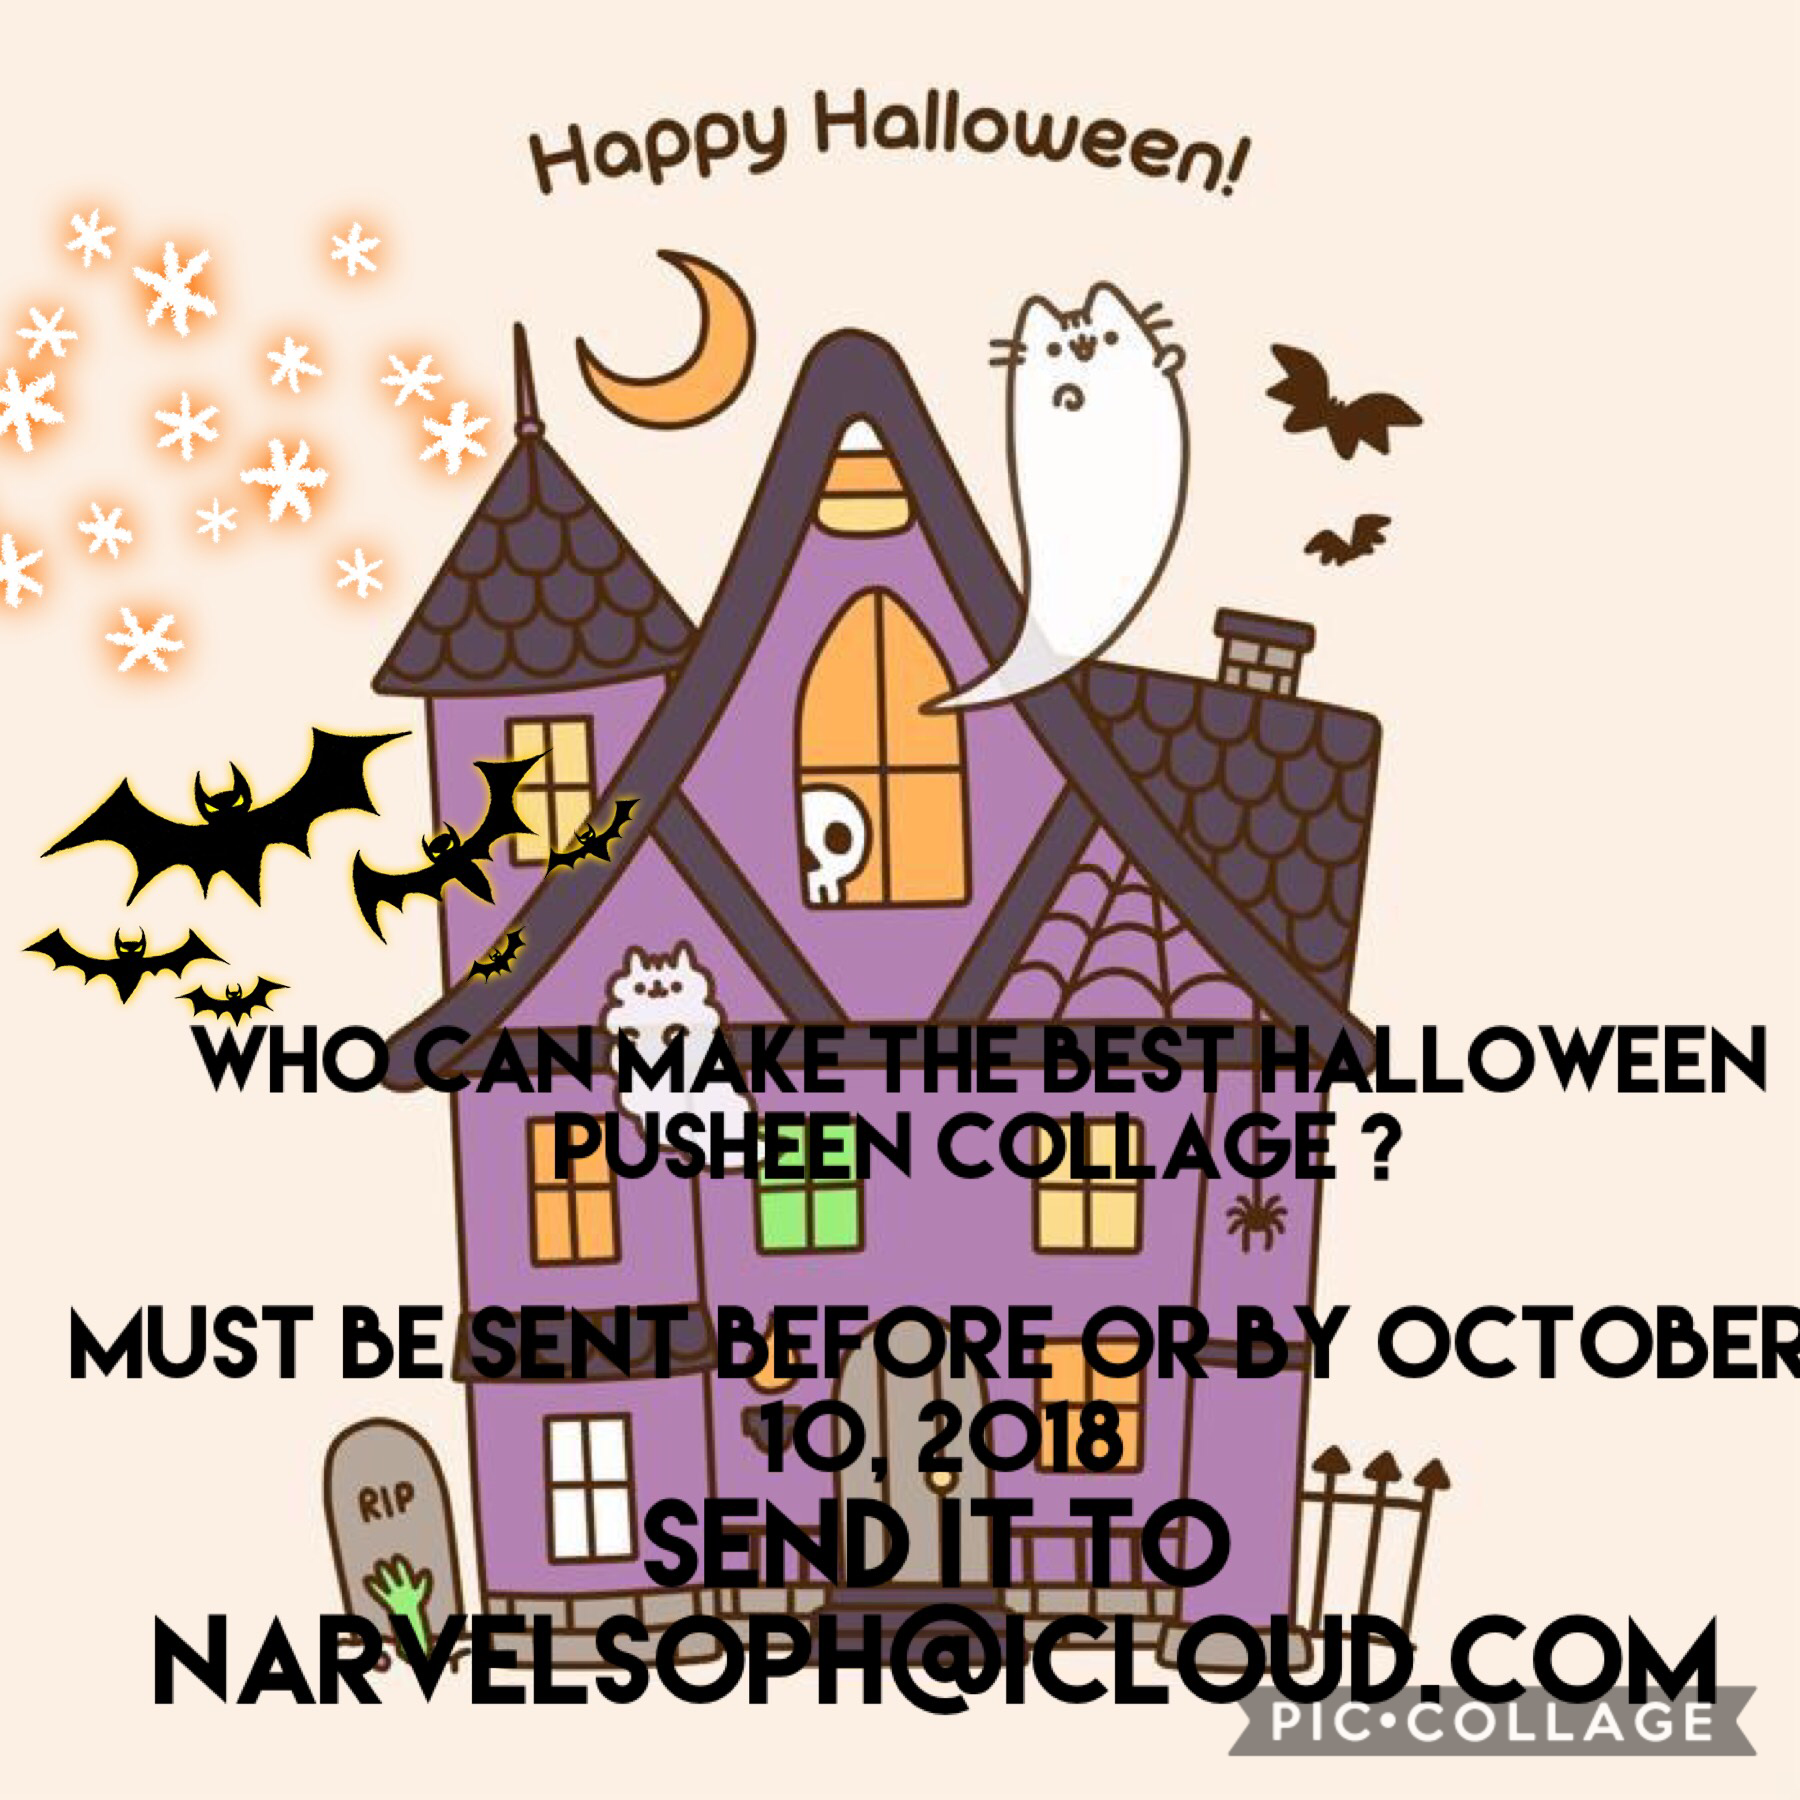 Who can make the best Pusheen Halloween collage??